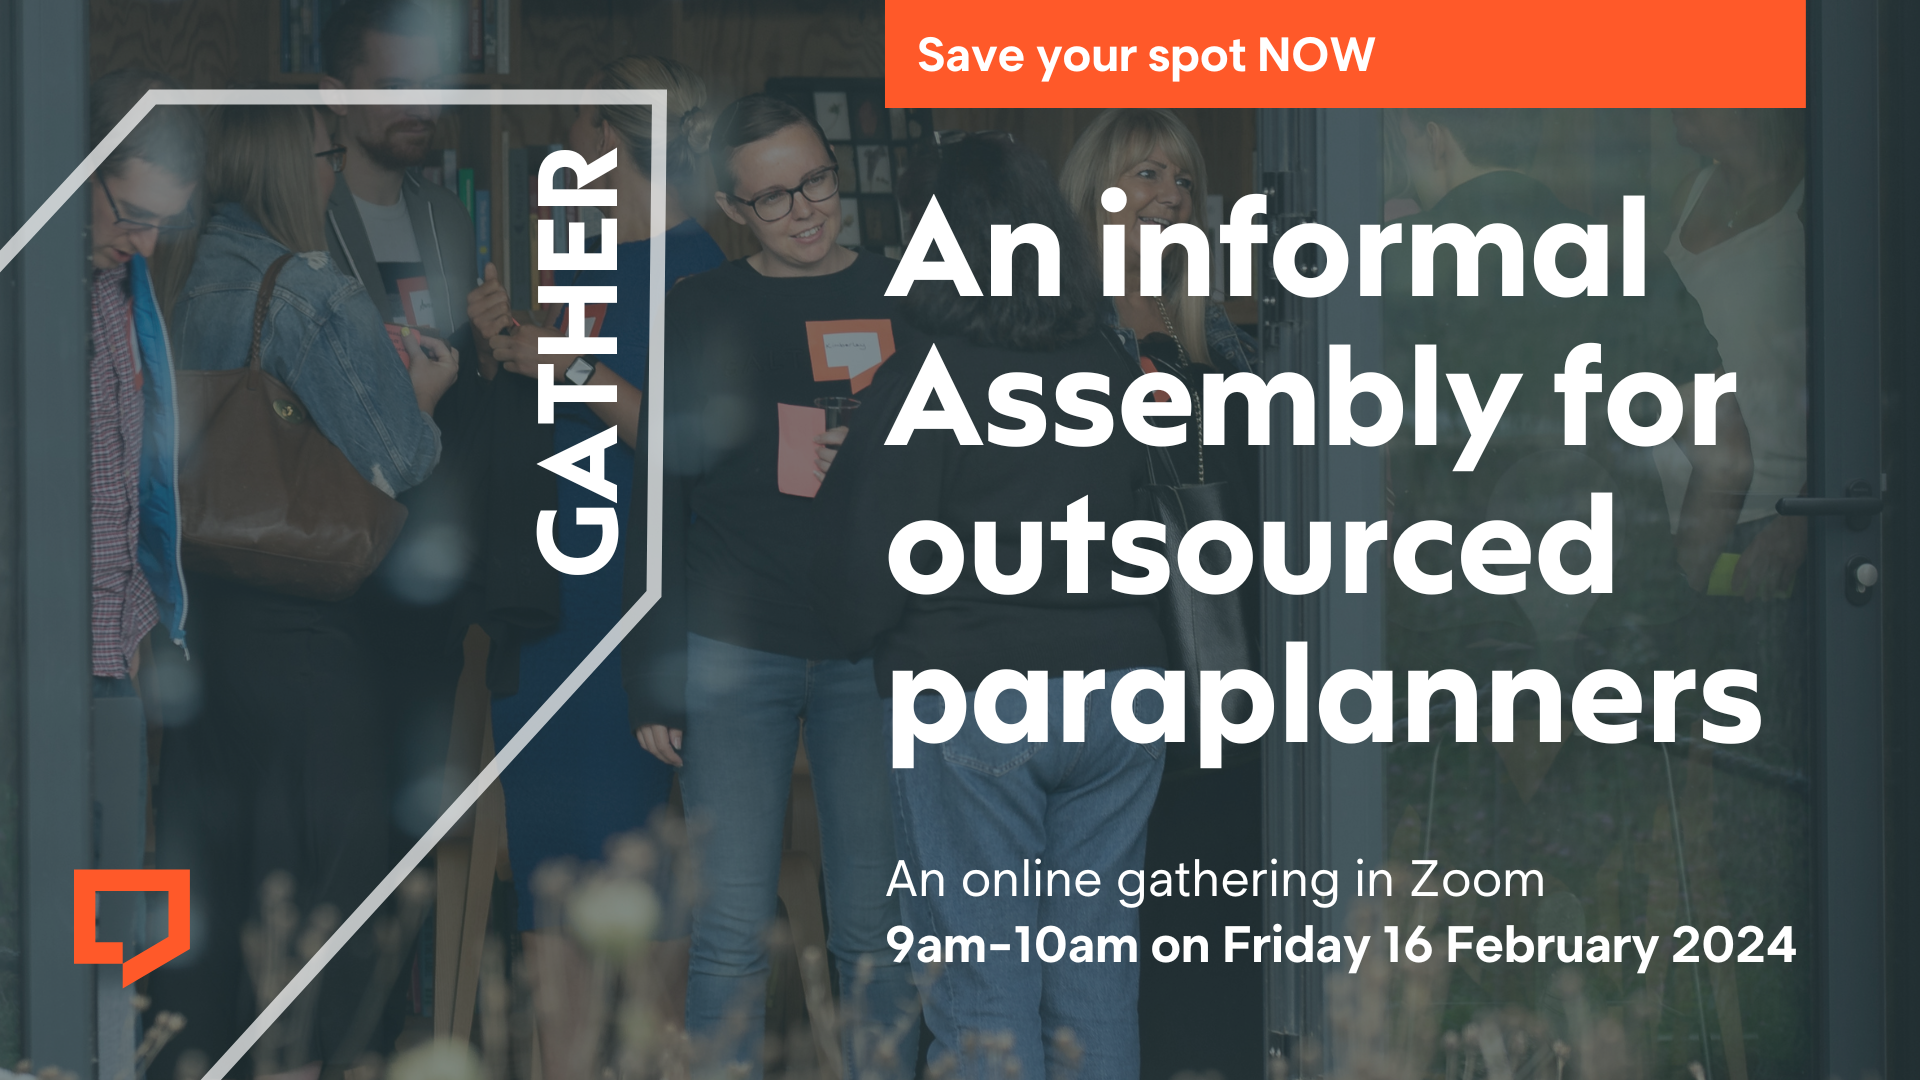 Save your spot now. An informal Assembly for outsourced paraplanners. An online gathering in Zoom. 9am to 10am on Friday 16 Febraury 2024.